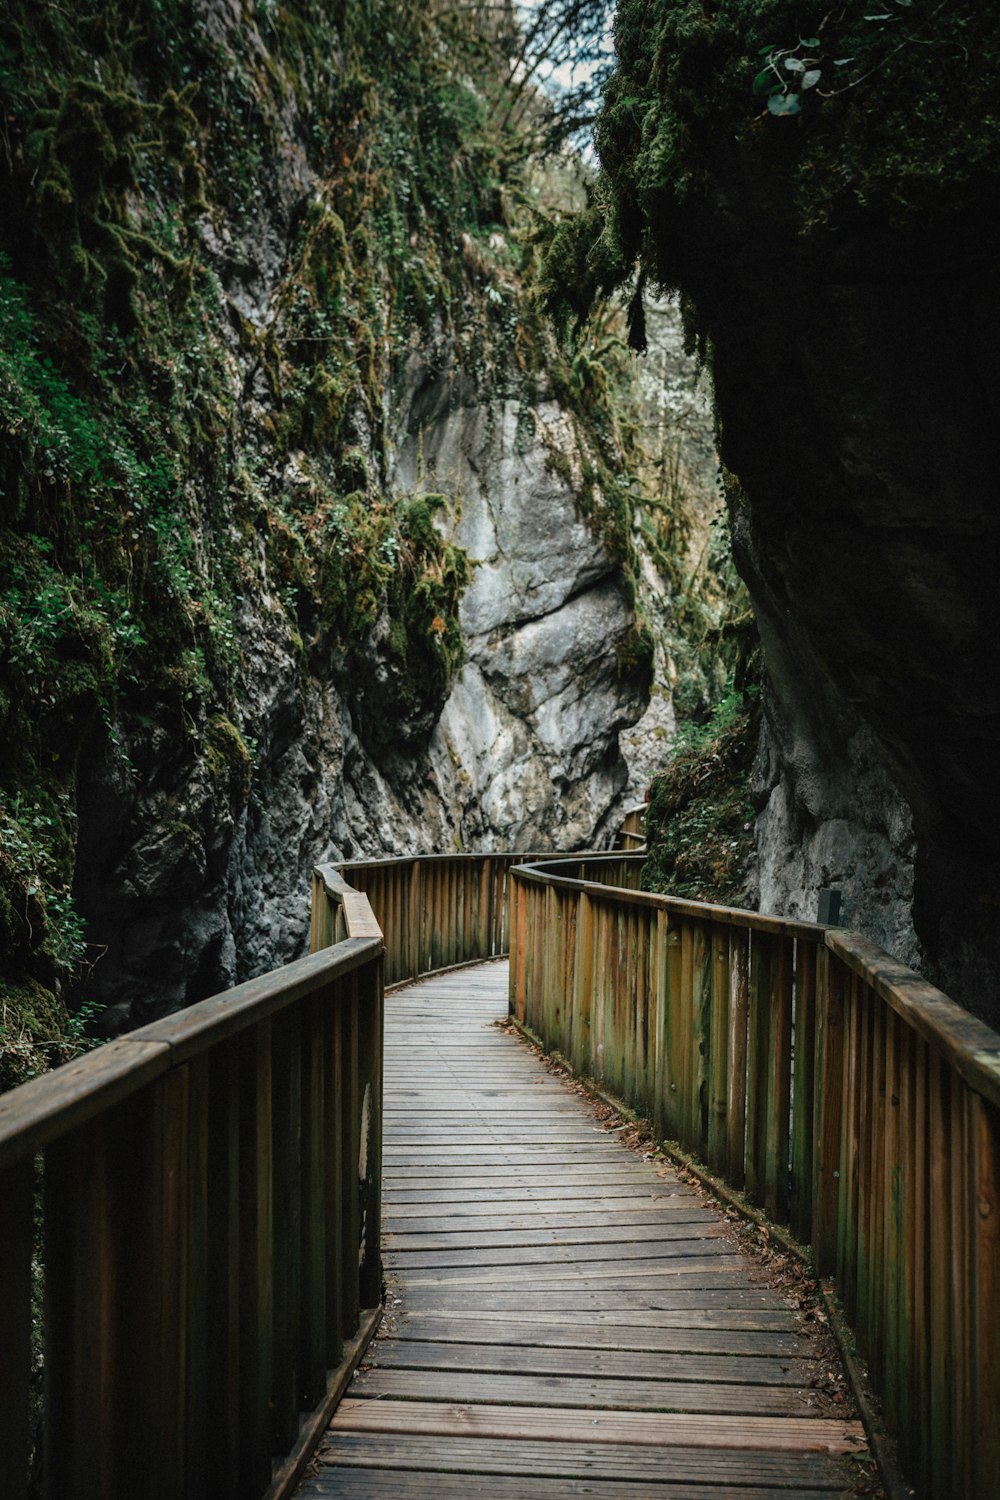 a wooden walkway leading to a rocky cliff